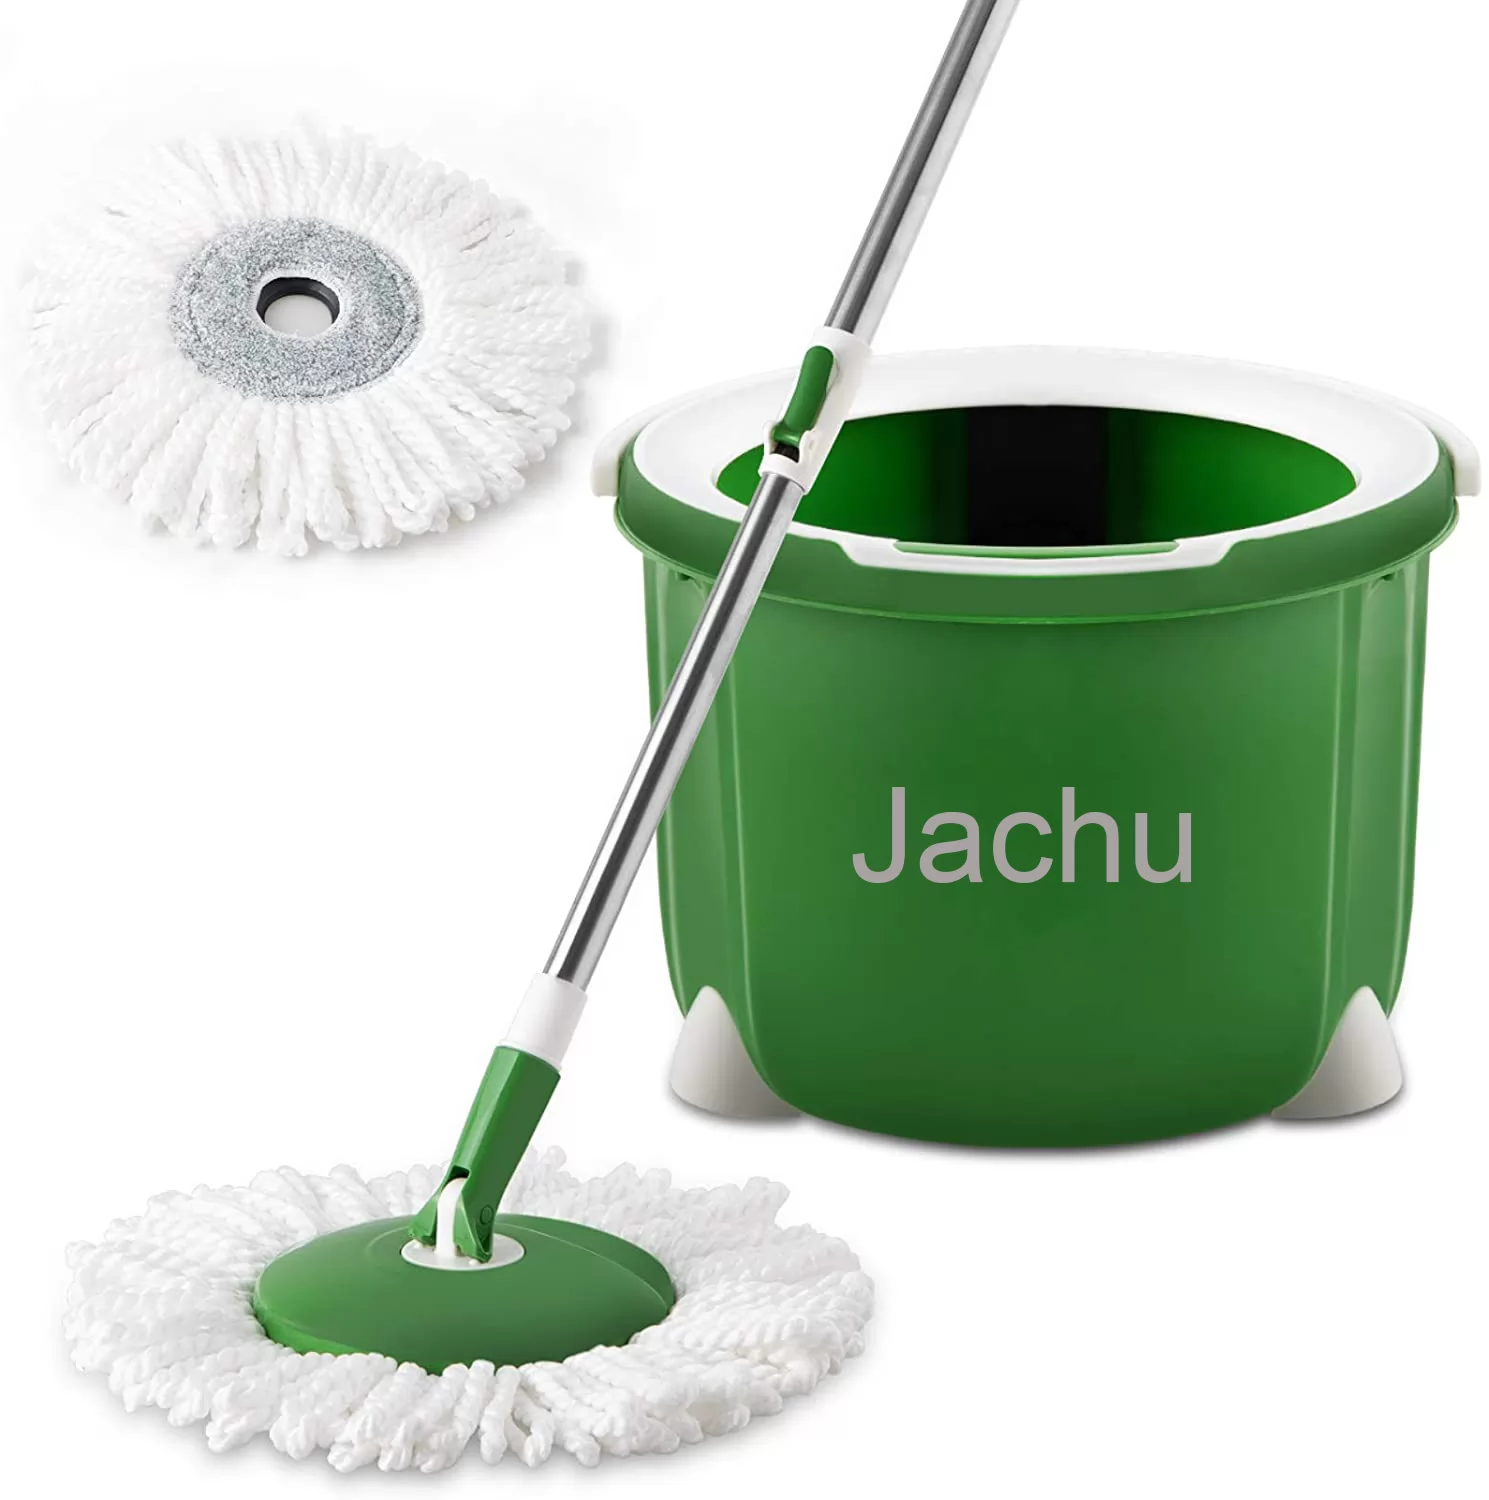 Jachu Microfiber Spin Mop Bucket System with Total 2 Mop Pads Wringer Floor Cleaning Stainless Steel Automatic Rotary Washing System